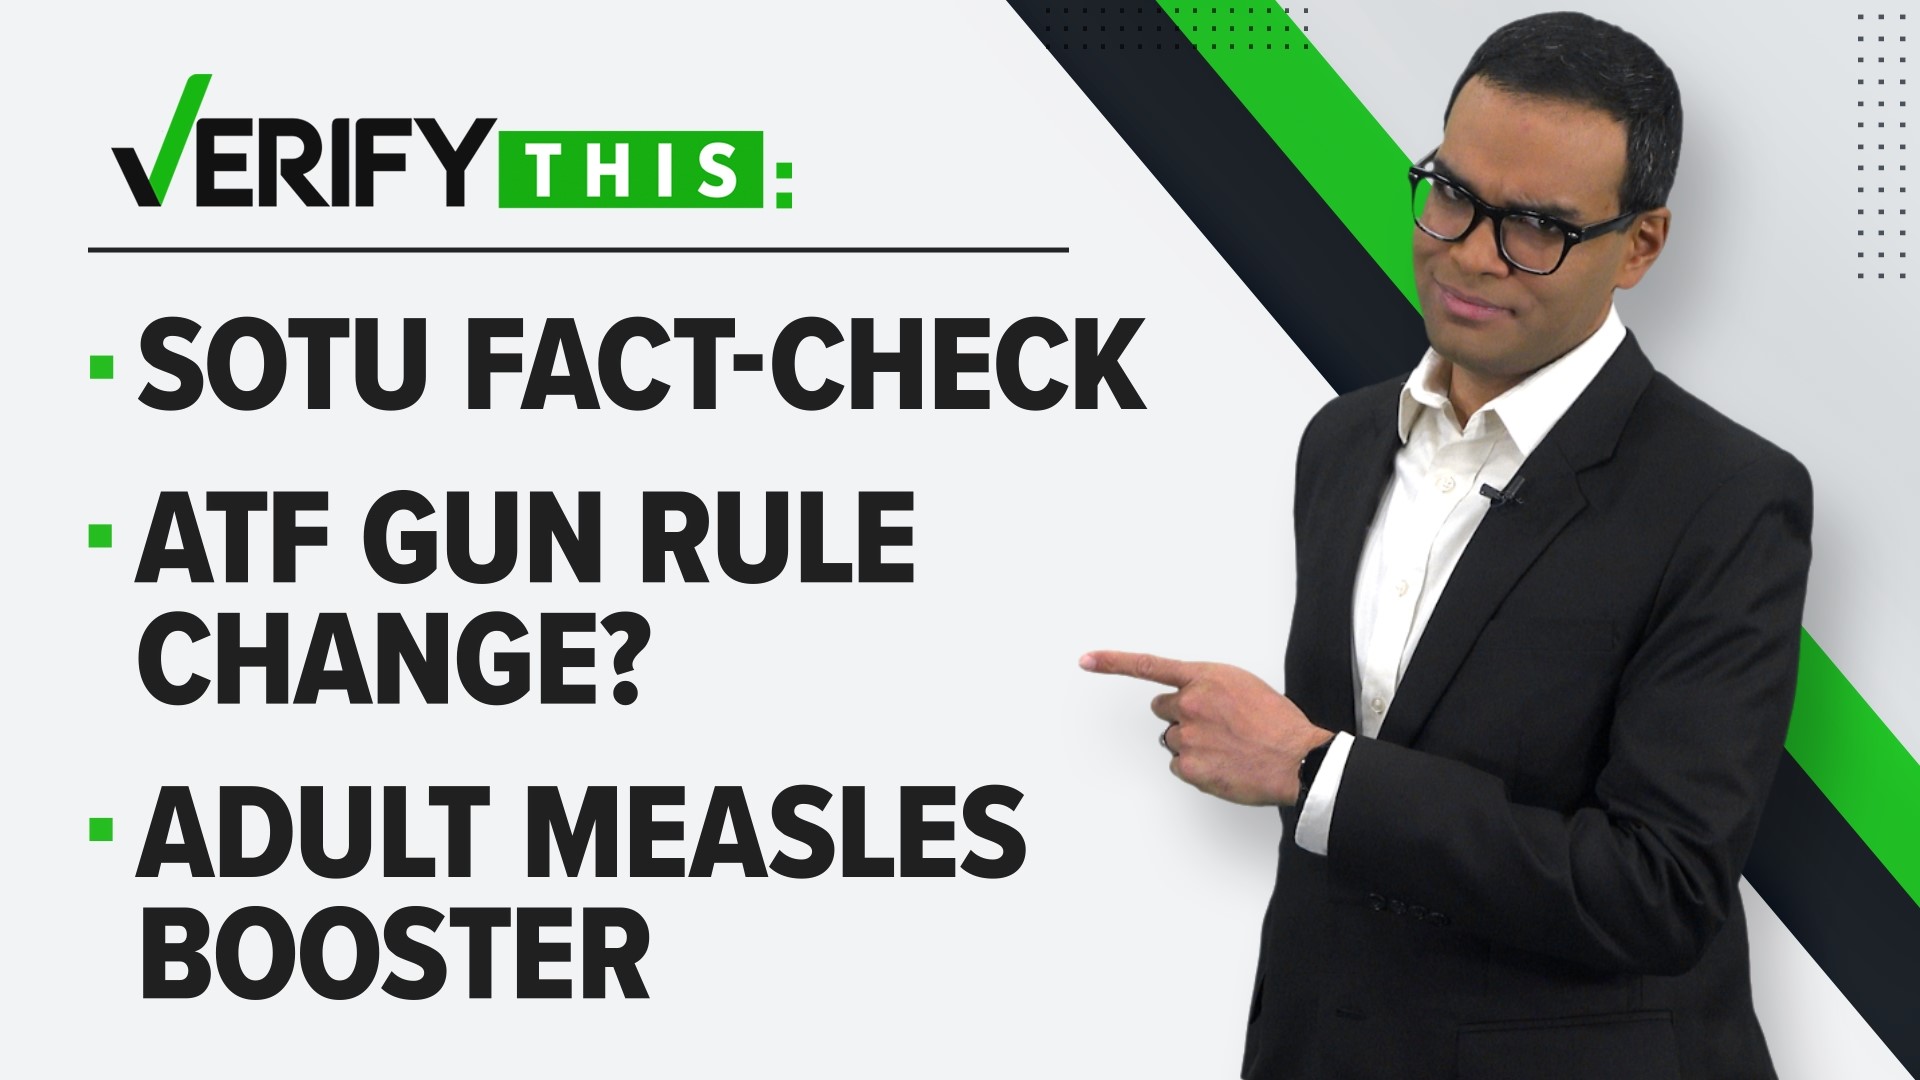 In this week's episode, we verify claims from Biden's SOTU address, look at a viral claim that the ATF is changing its gun rules and if adults need a measles booster